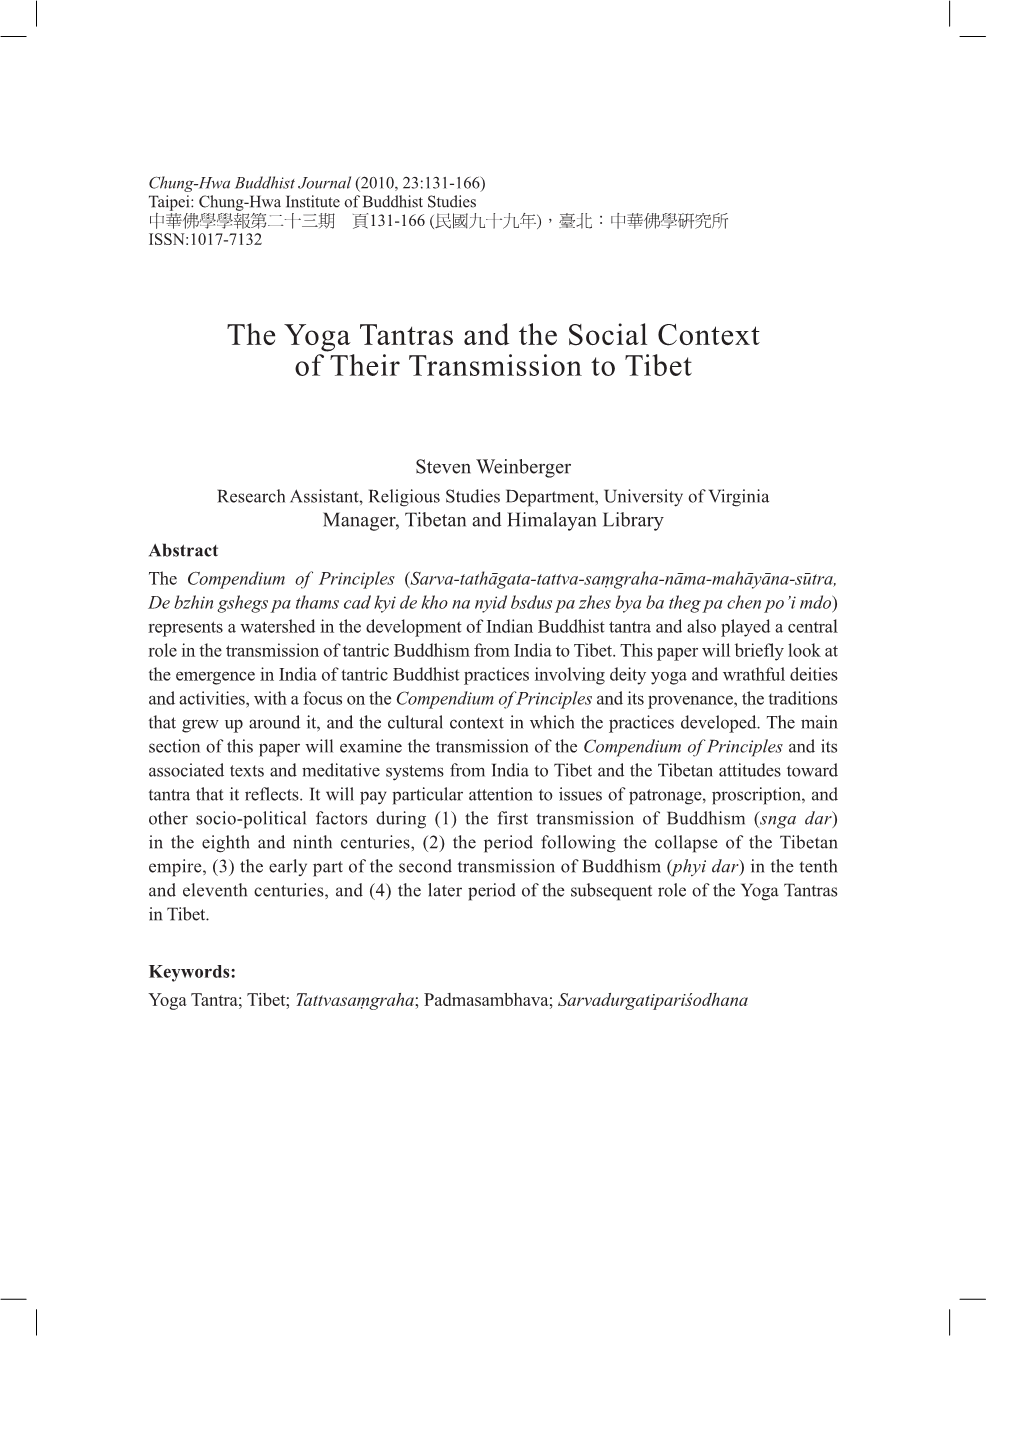 The Yoga Tantras and the Social Context of Their Transmission to Tibet